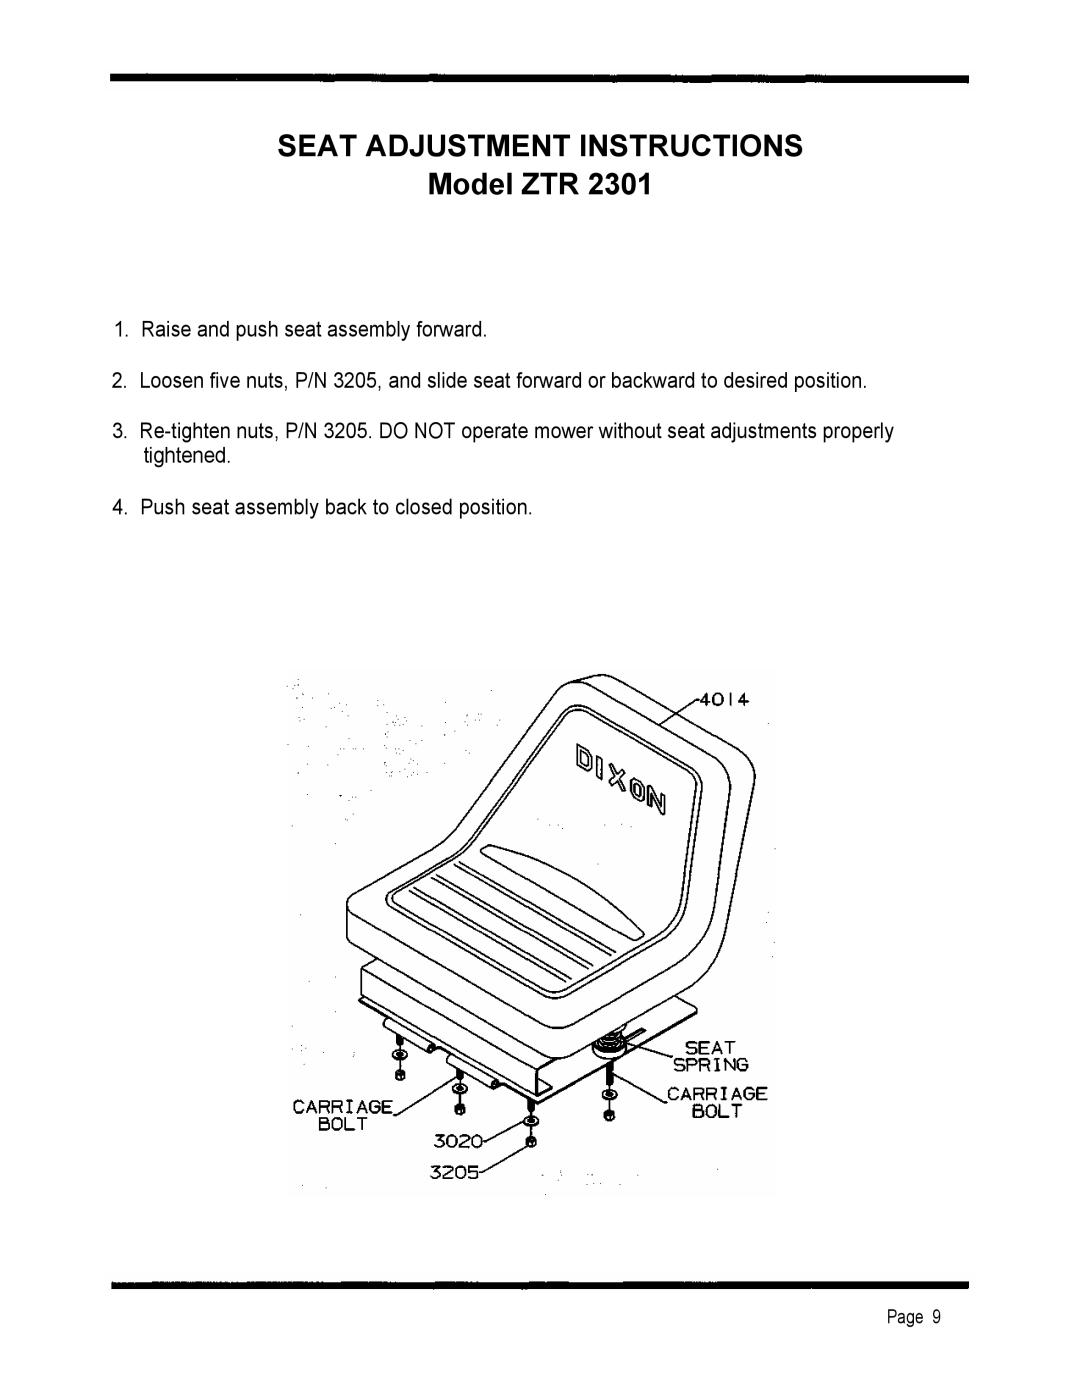 Dixon 2301 manual SEAT ADJUSTMENT INSTRUCTIONS Model ZTR, Raise and push seat assembly forward 